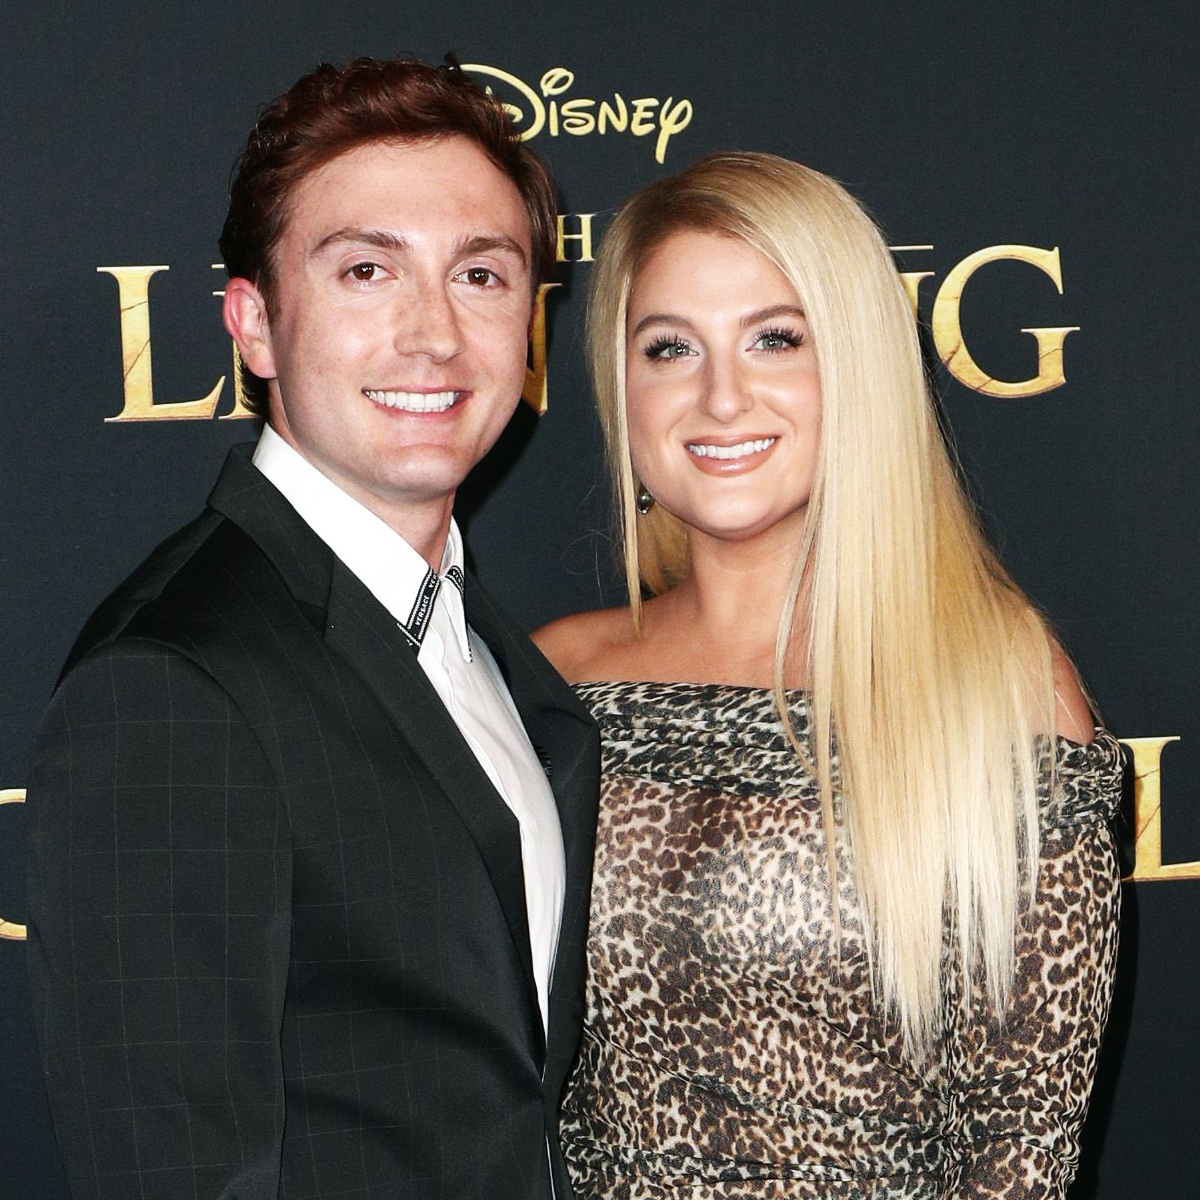 Meghan Trainor Says She and Husband Have 2 Toilets Next to Each Other